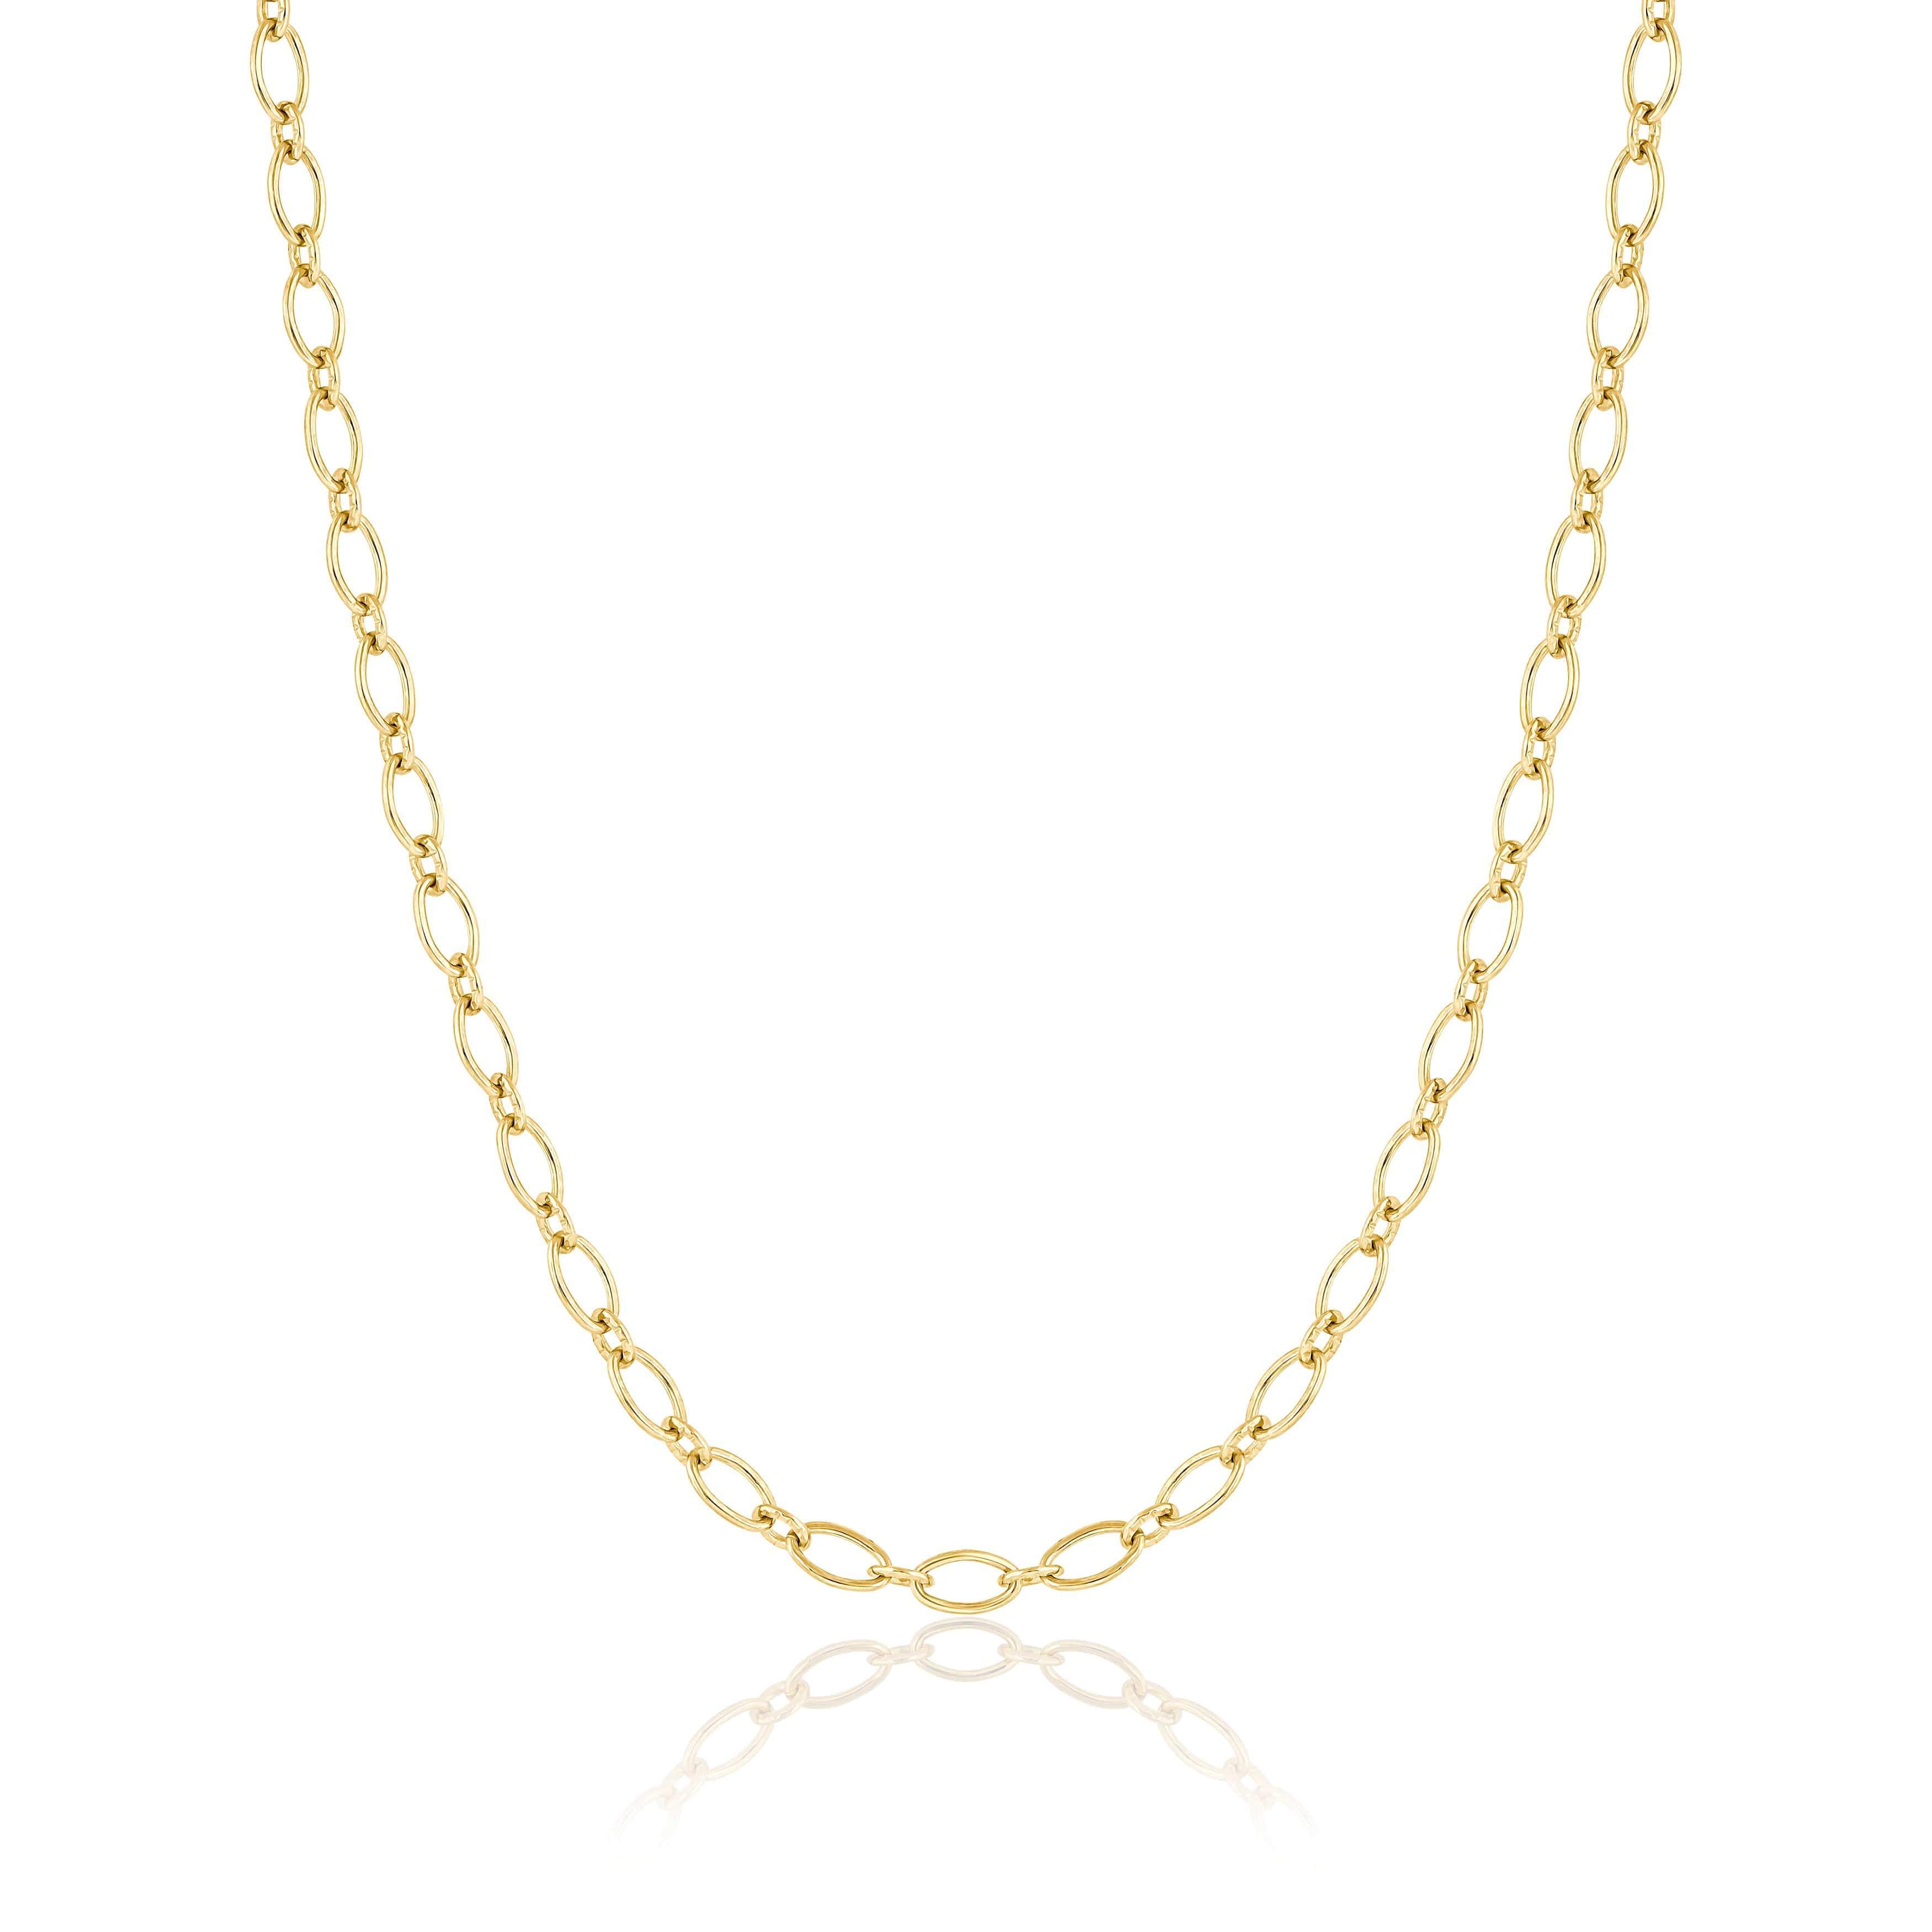 Sterling silver plated 14 karat gold oval and round mini chain necklace.